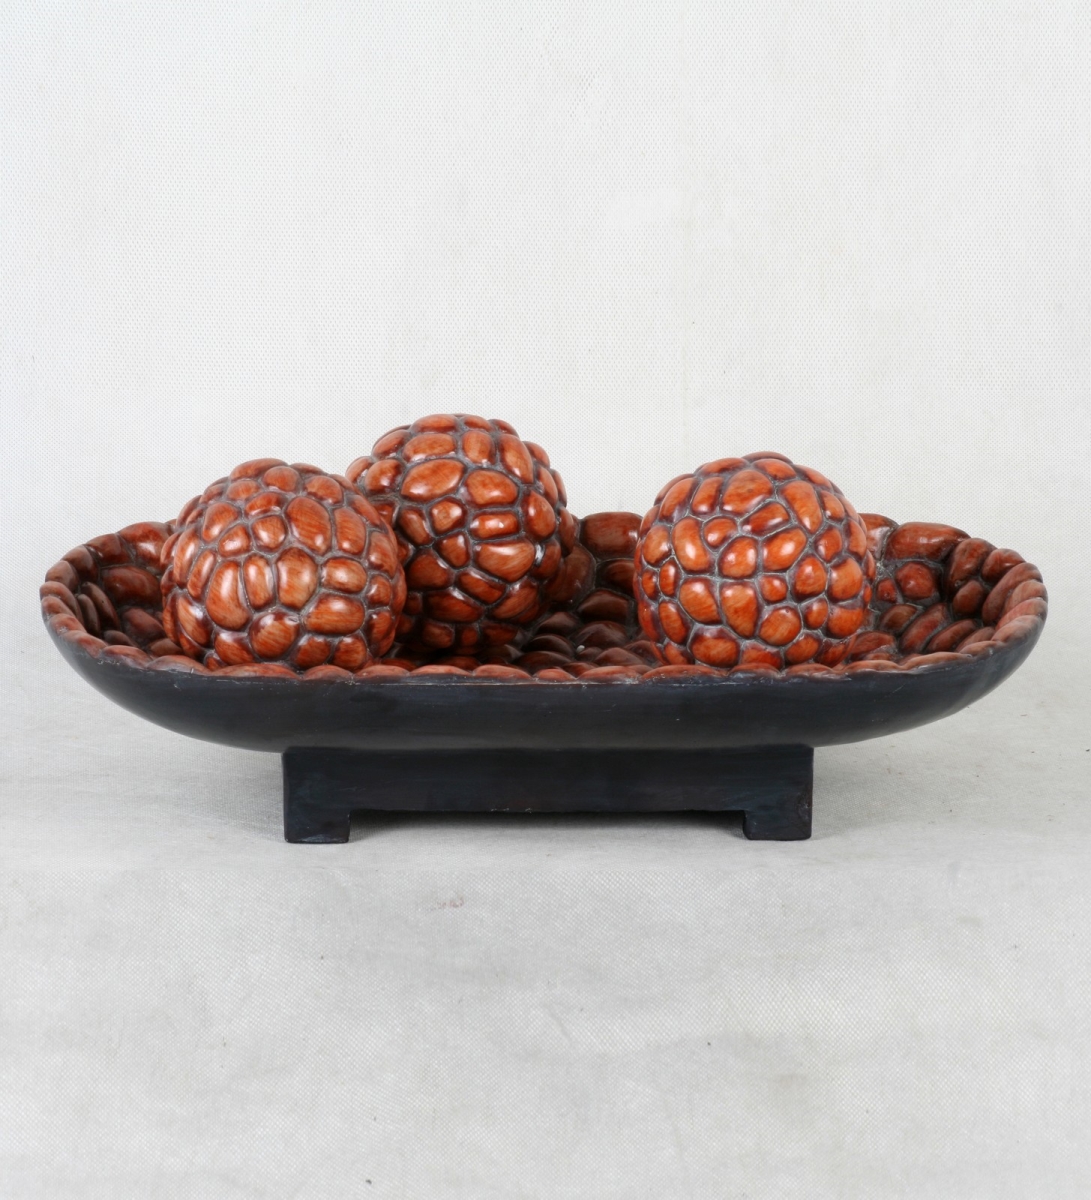 19414 4 In. Bowl With 3 Piece Spheres